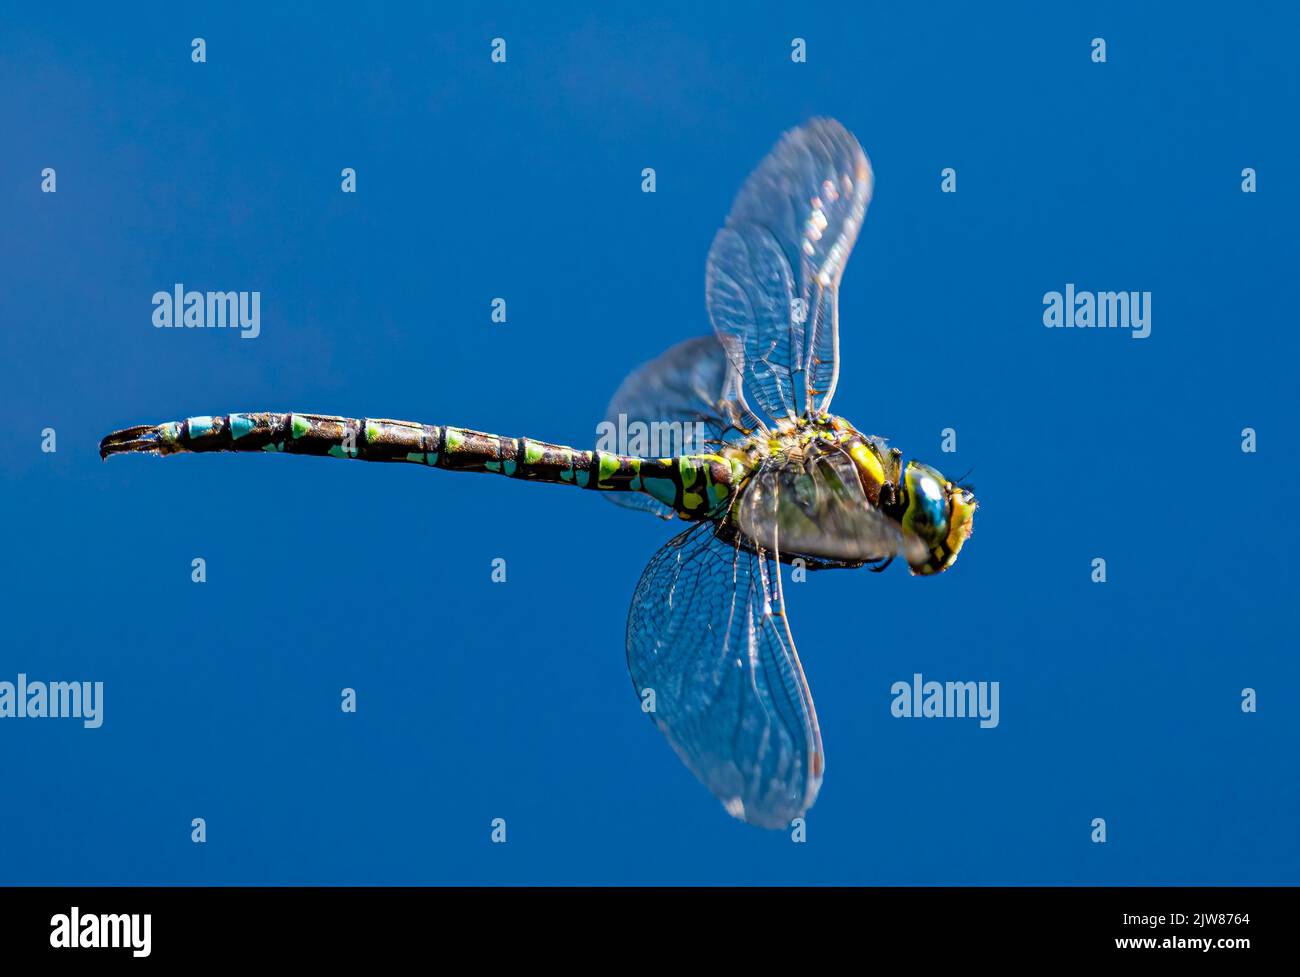 Dragonfly hunting for insects Stock Photo